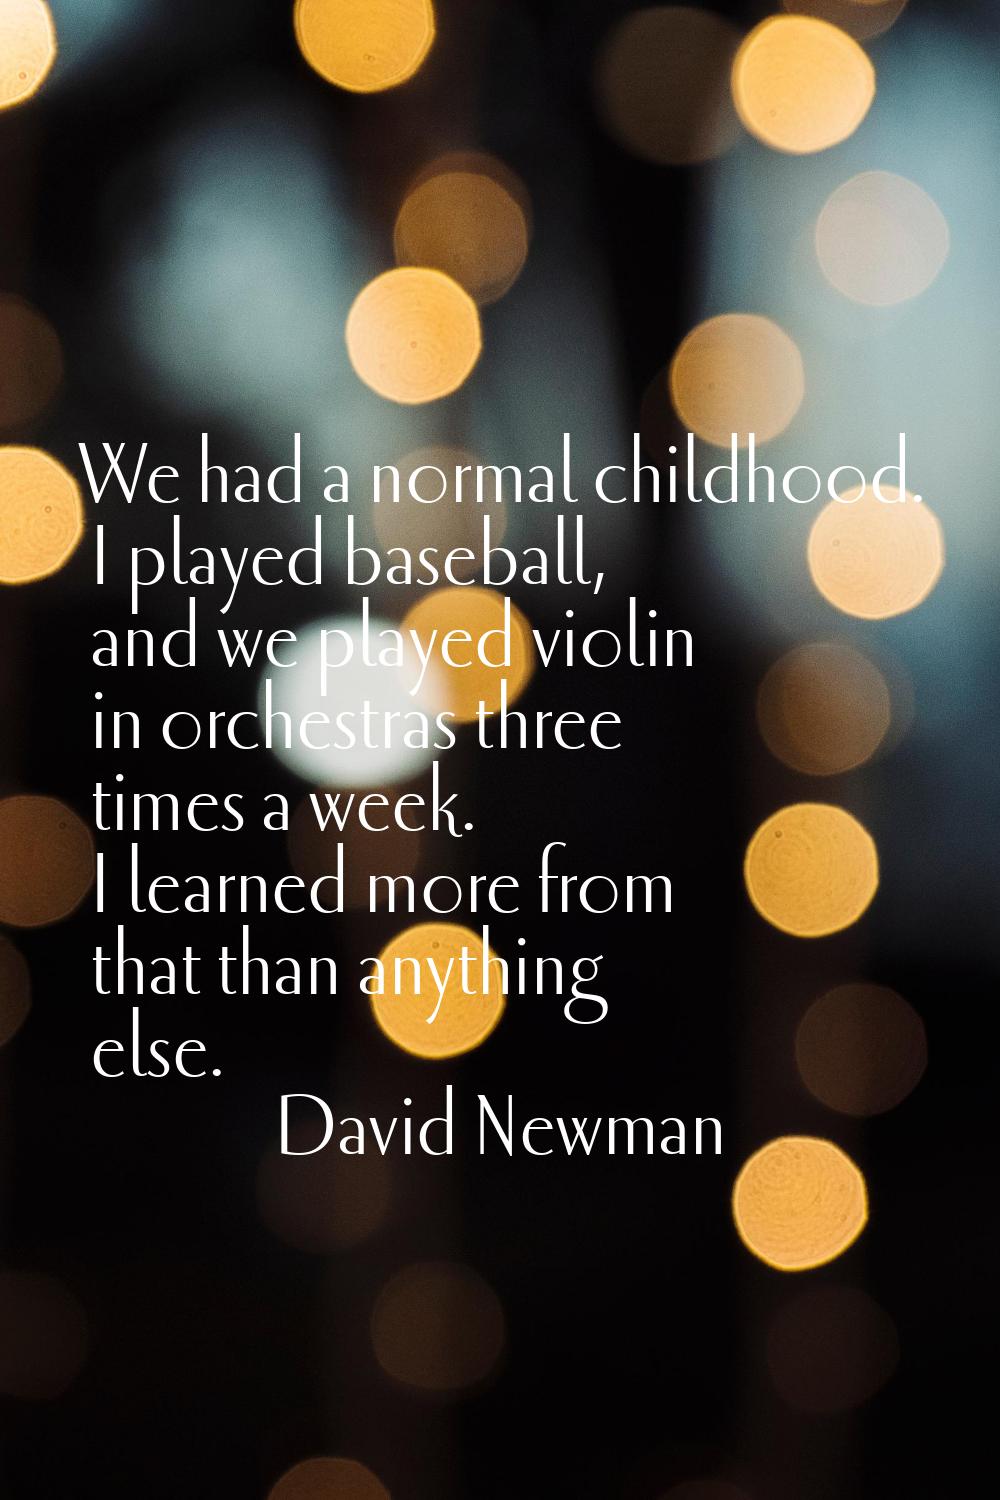 We had a normal childhood. I played baseball, and we played violin in orchestras three times a week